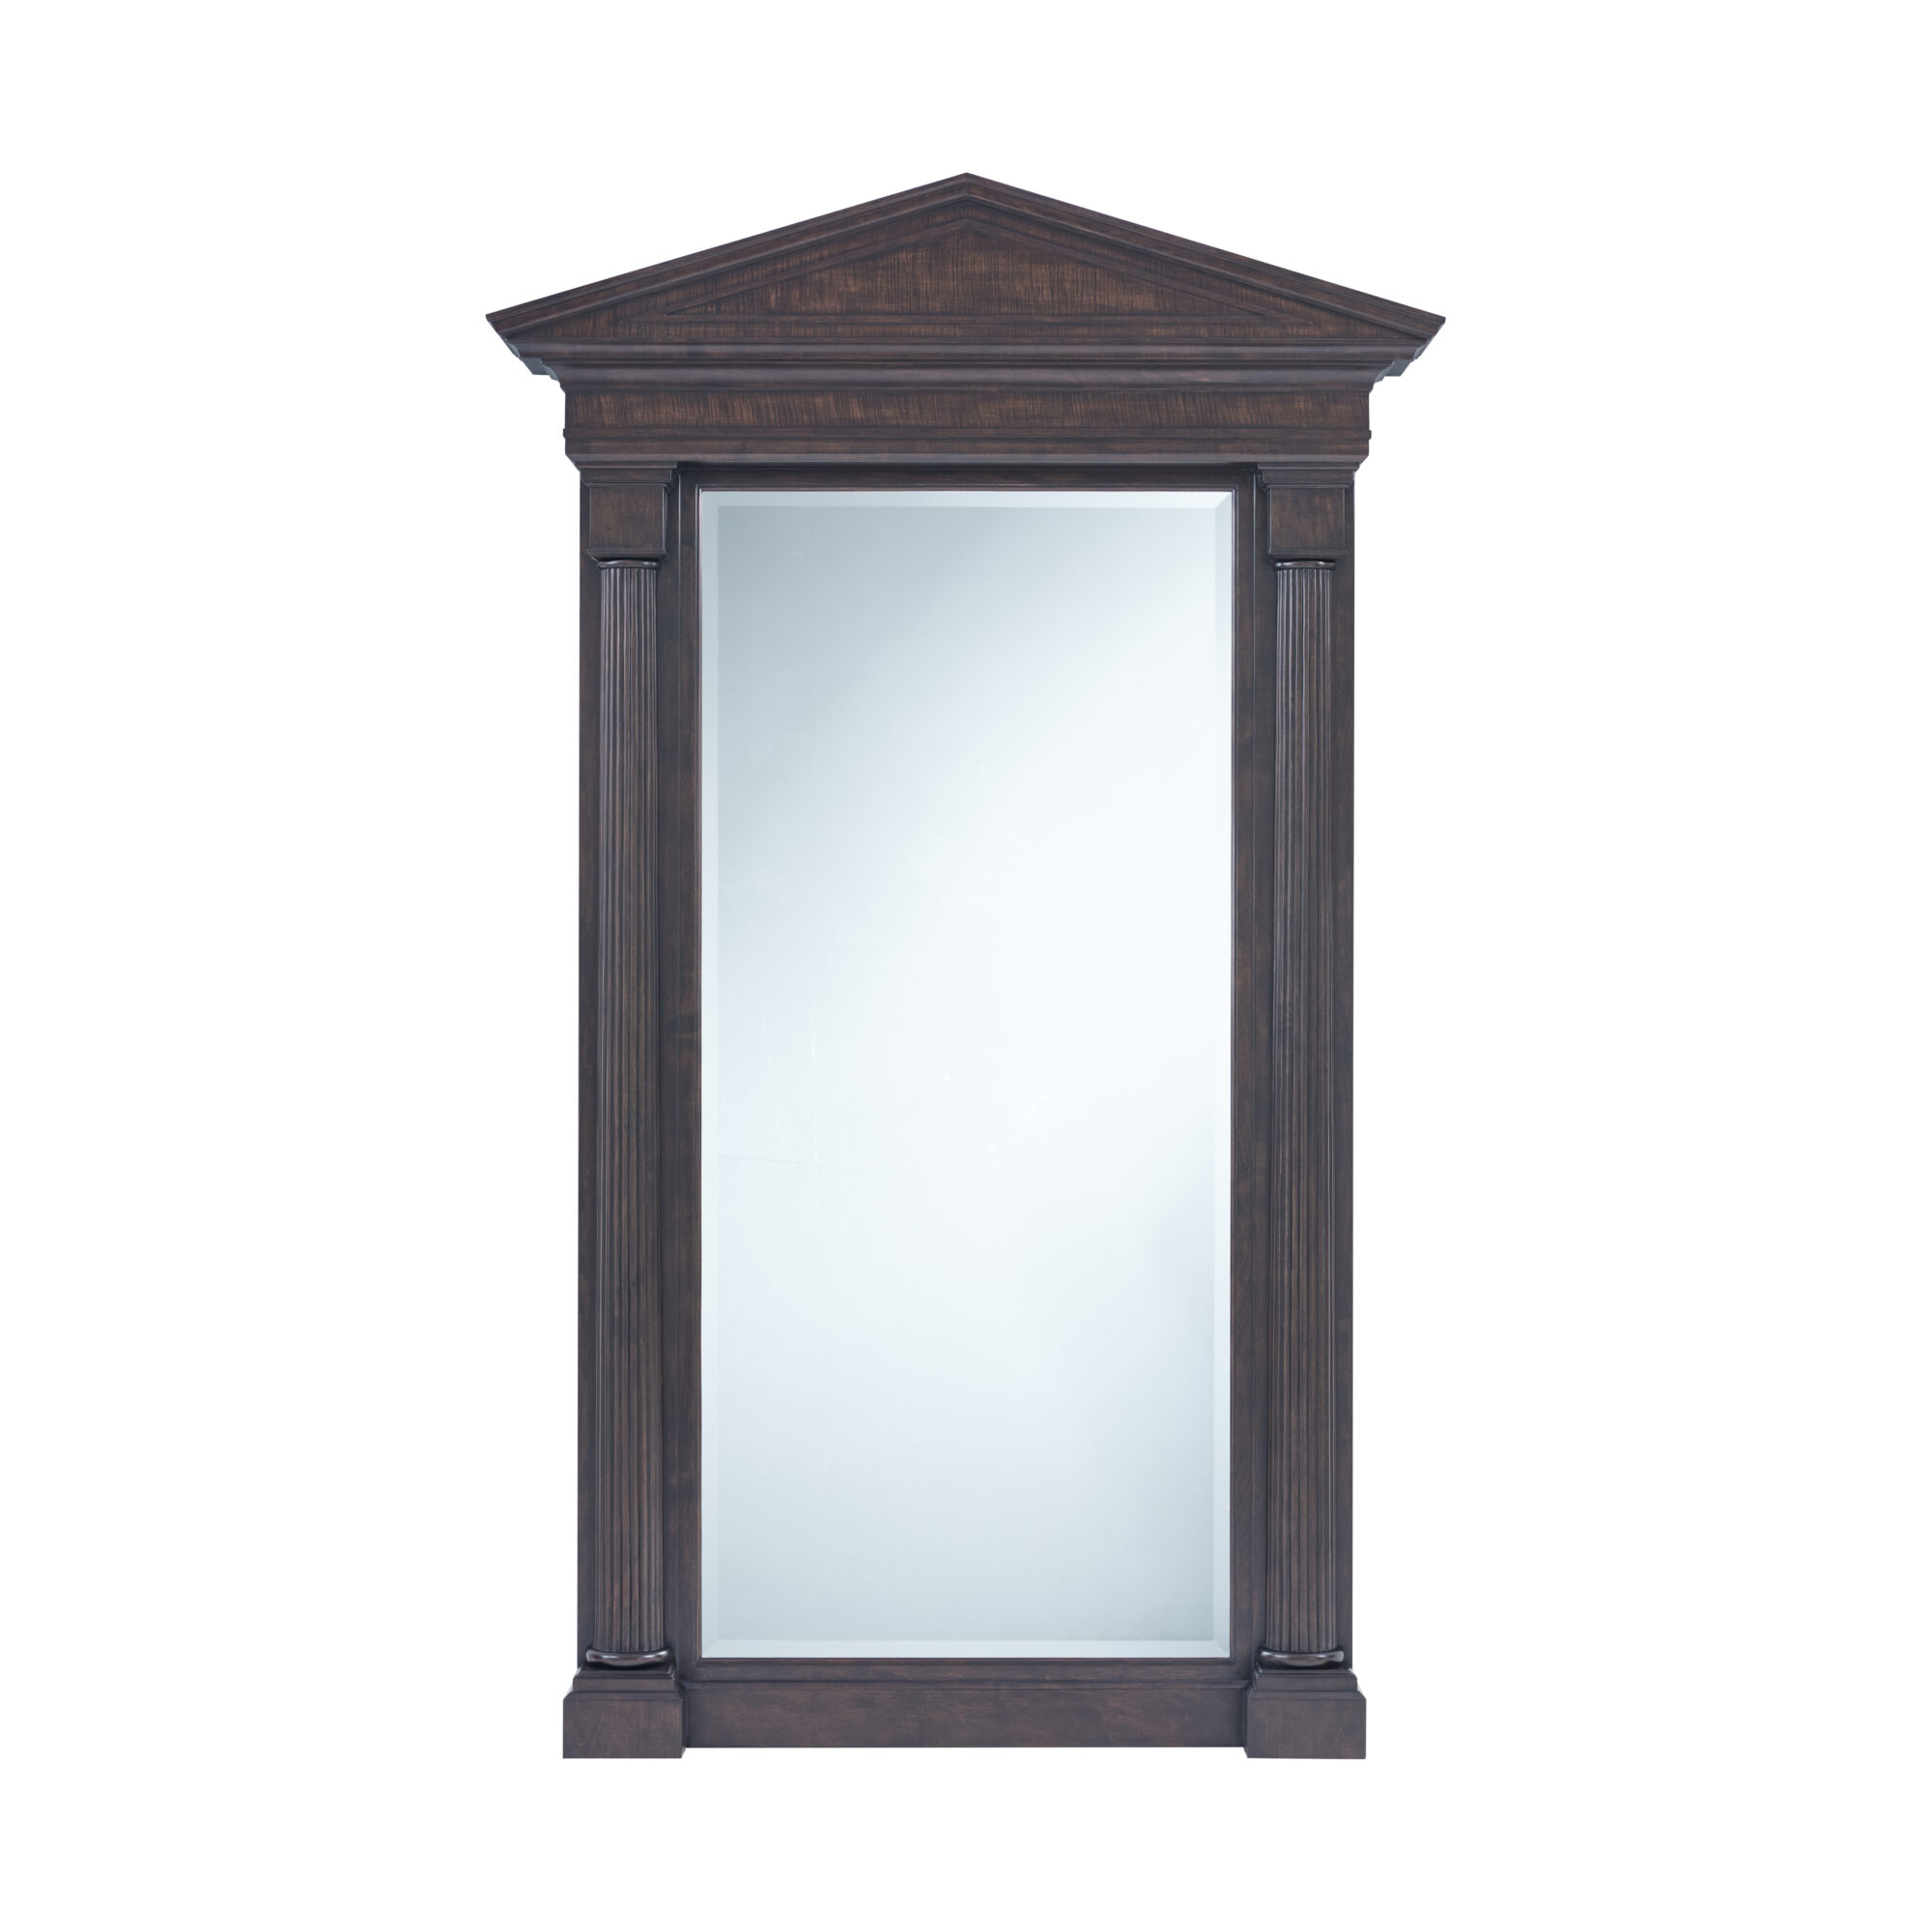 this large, tall mirror in a dark wood finish was featured at High Point Market